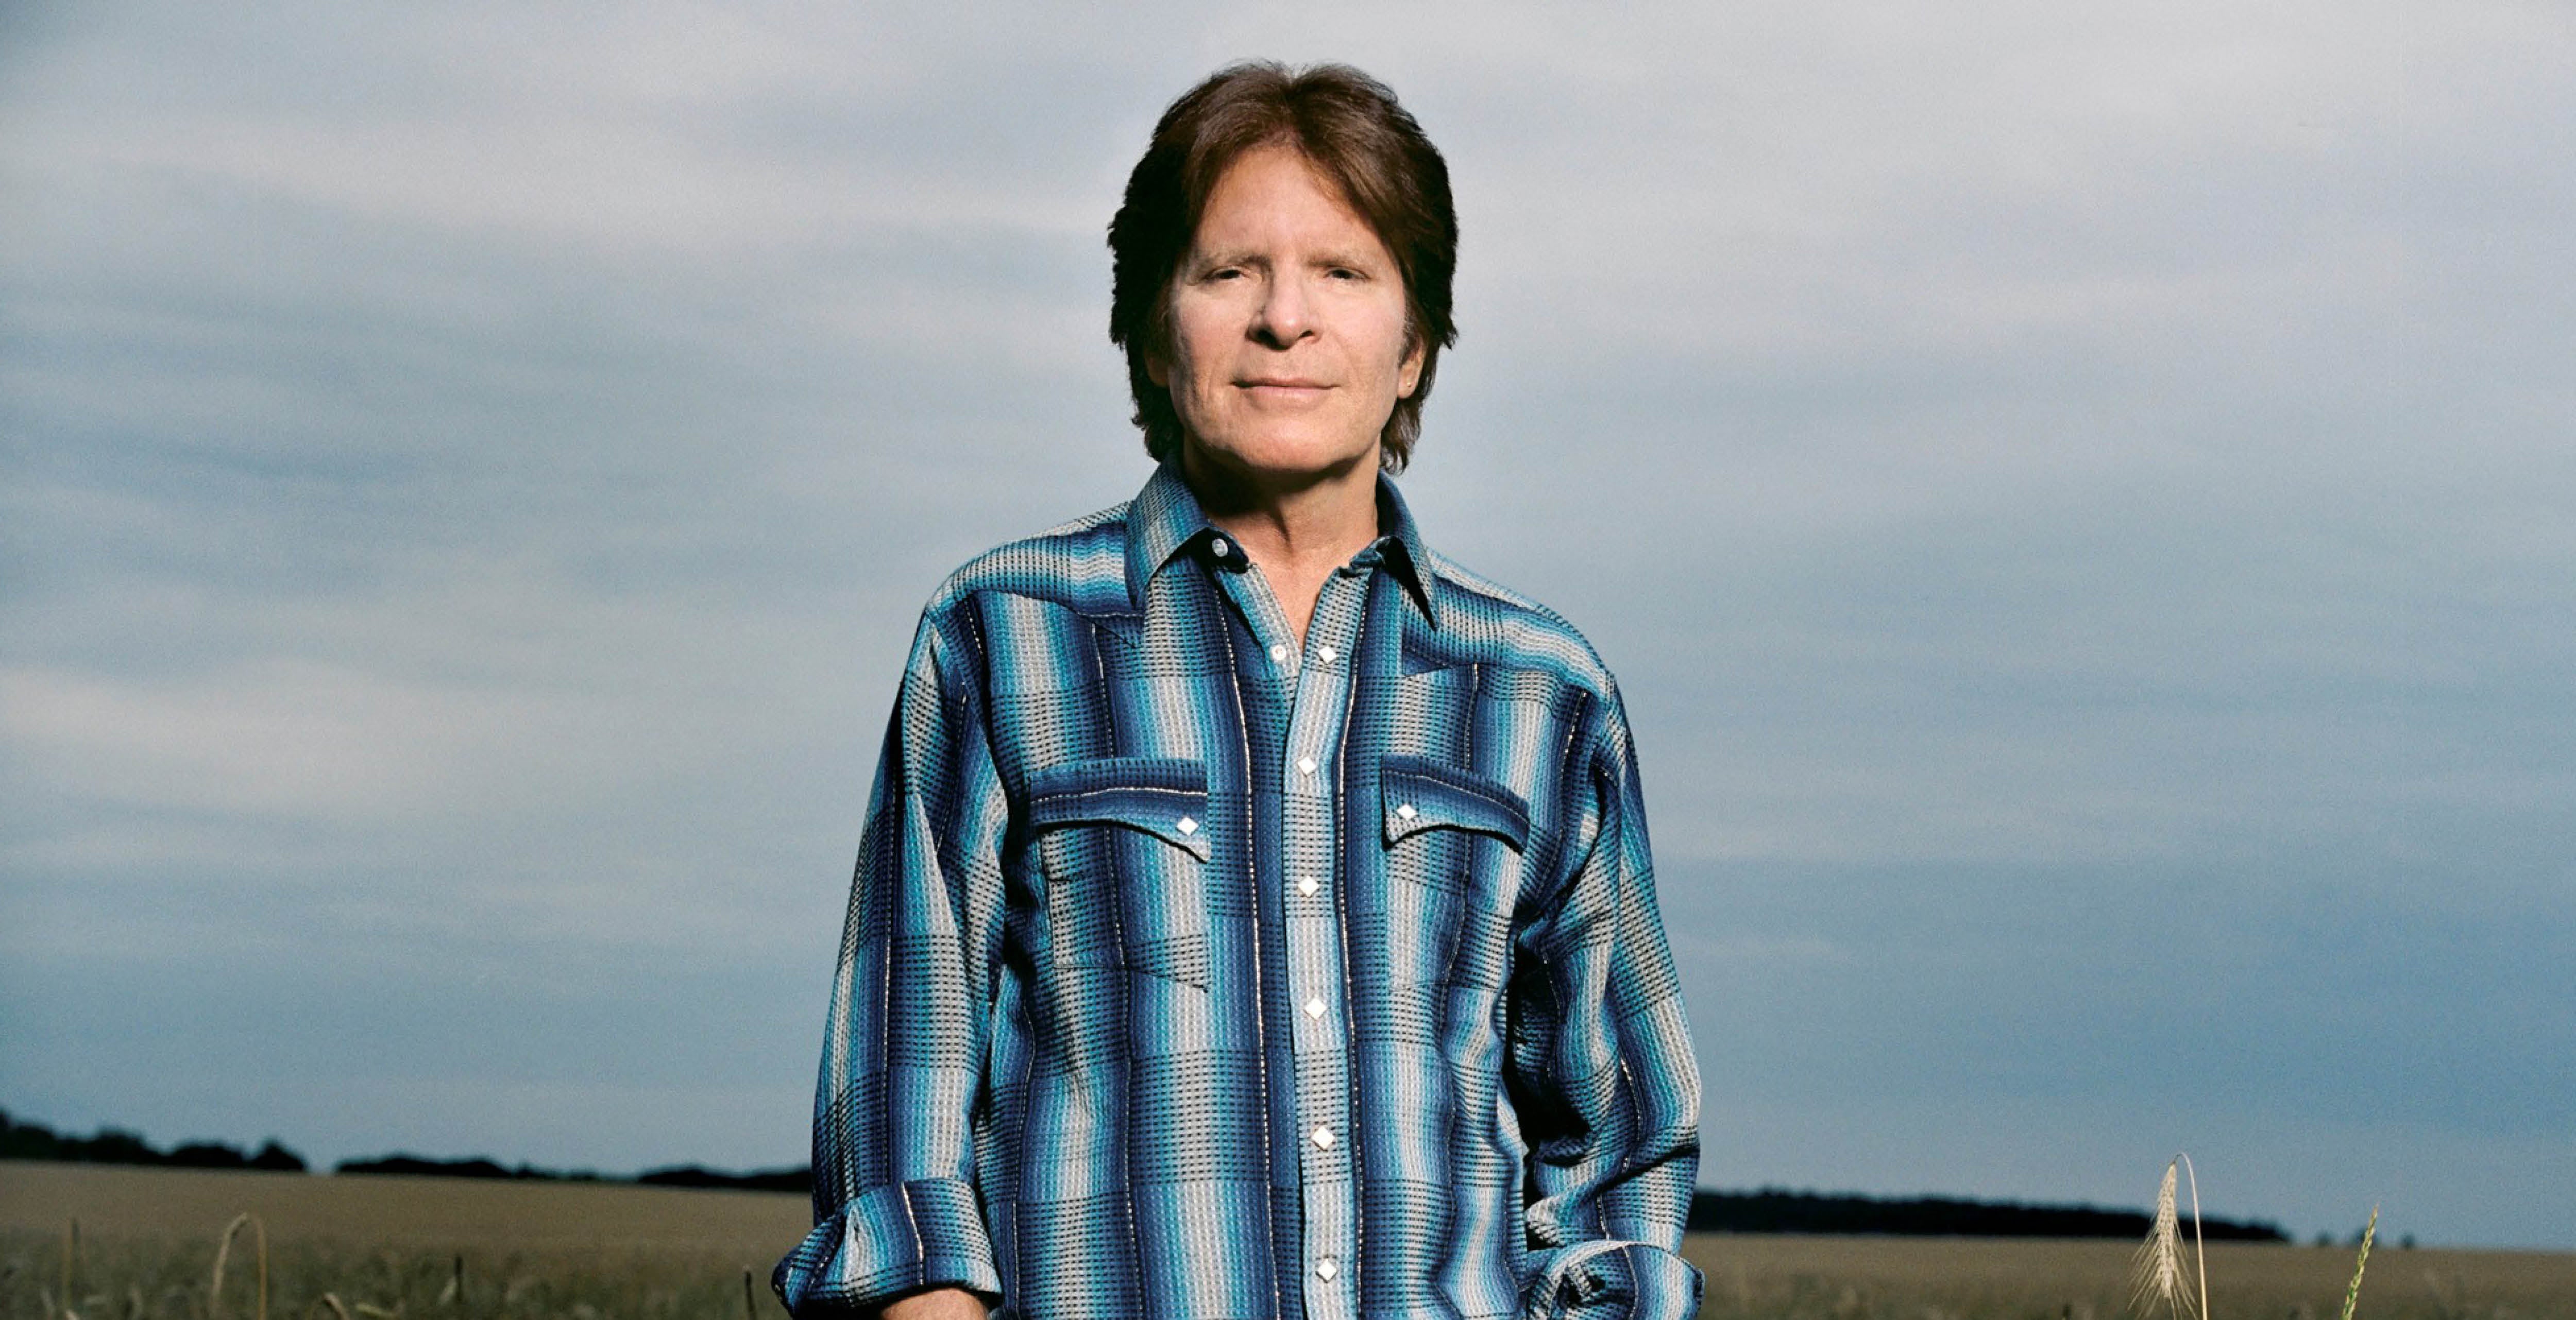 An Evening of Wine and Music with John Fogerty